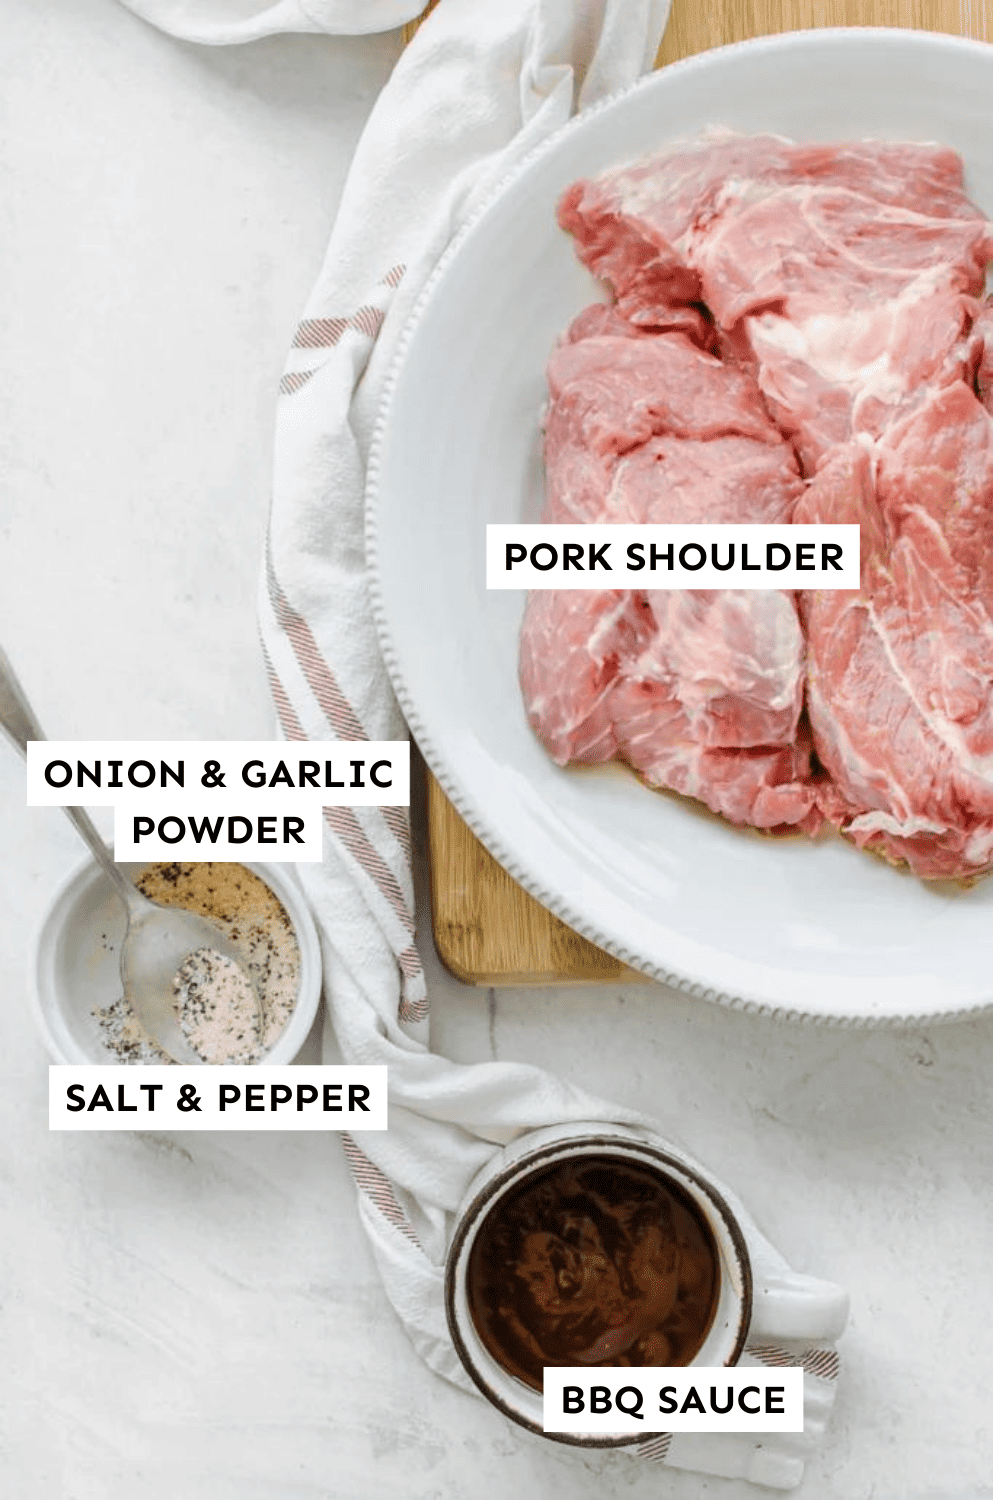 Pulled pork ingredients for the instant pot or slow cooker measured and labeled.